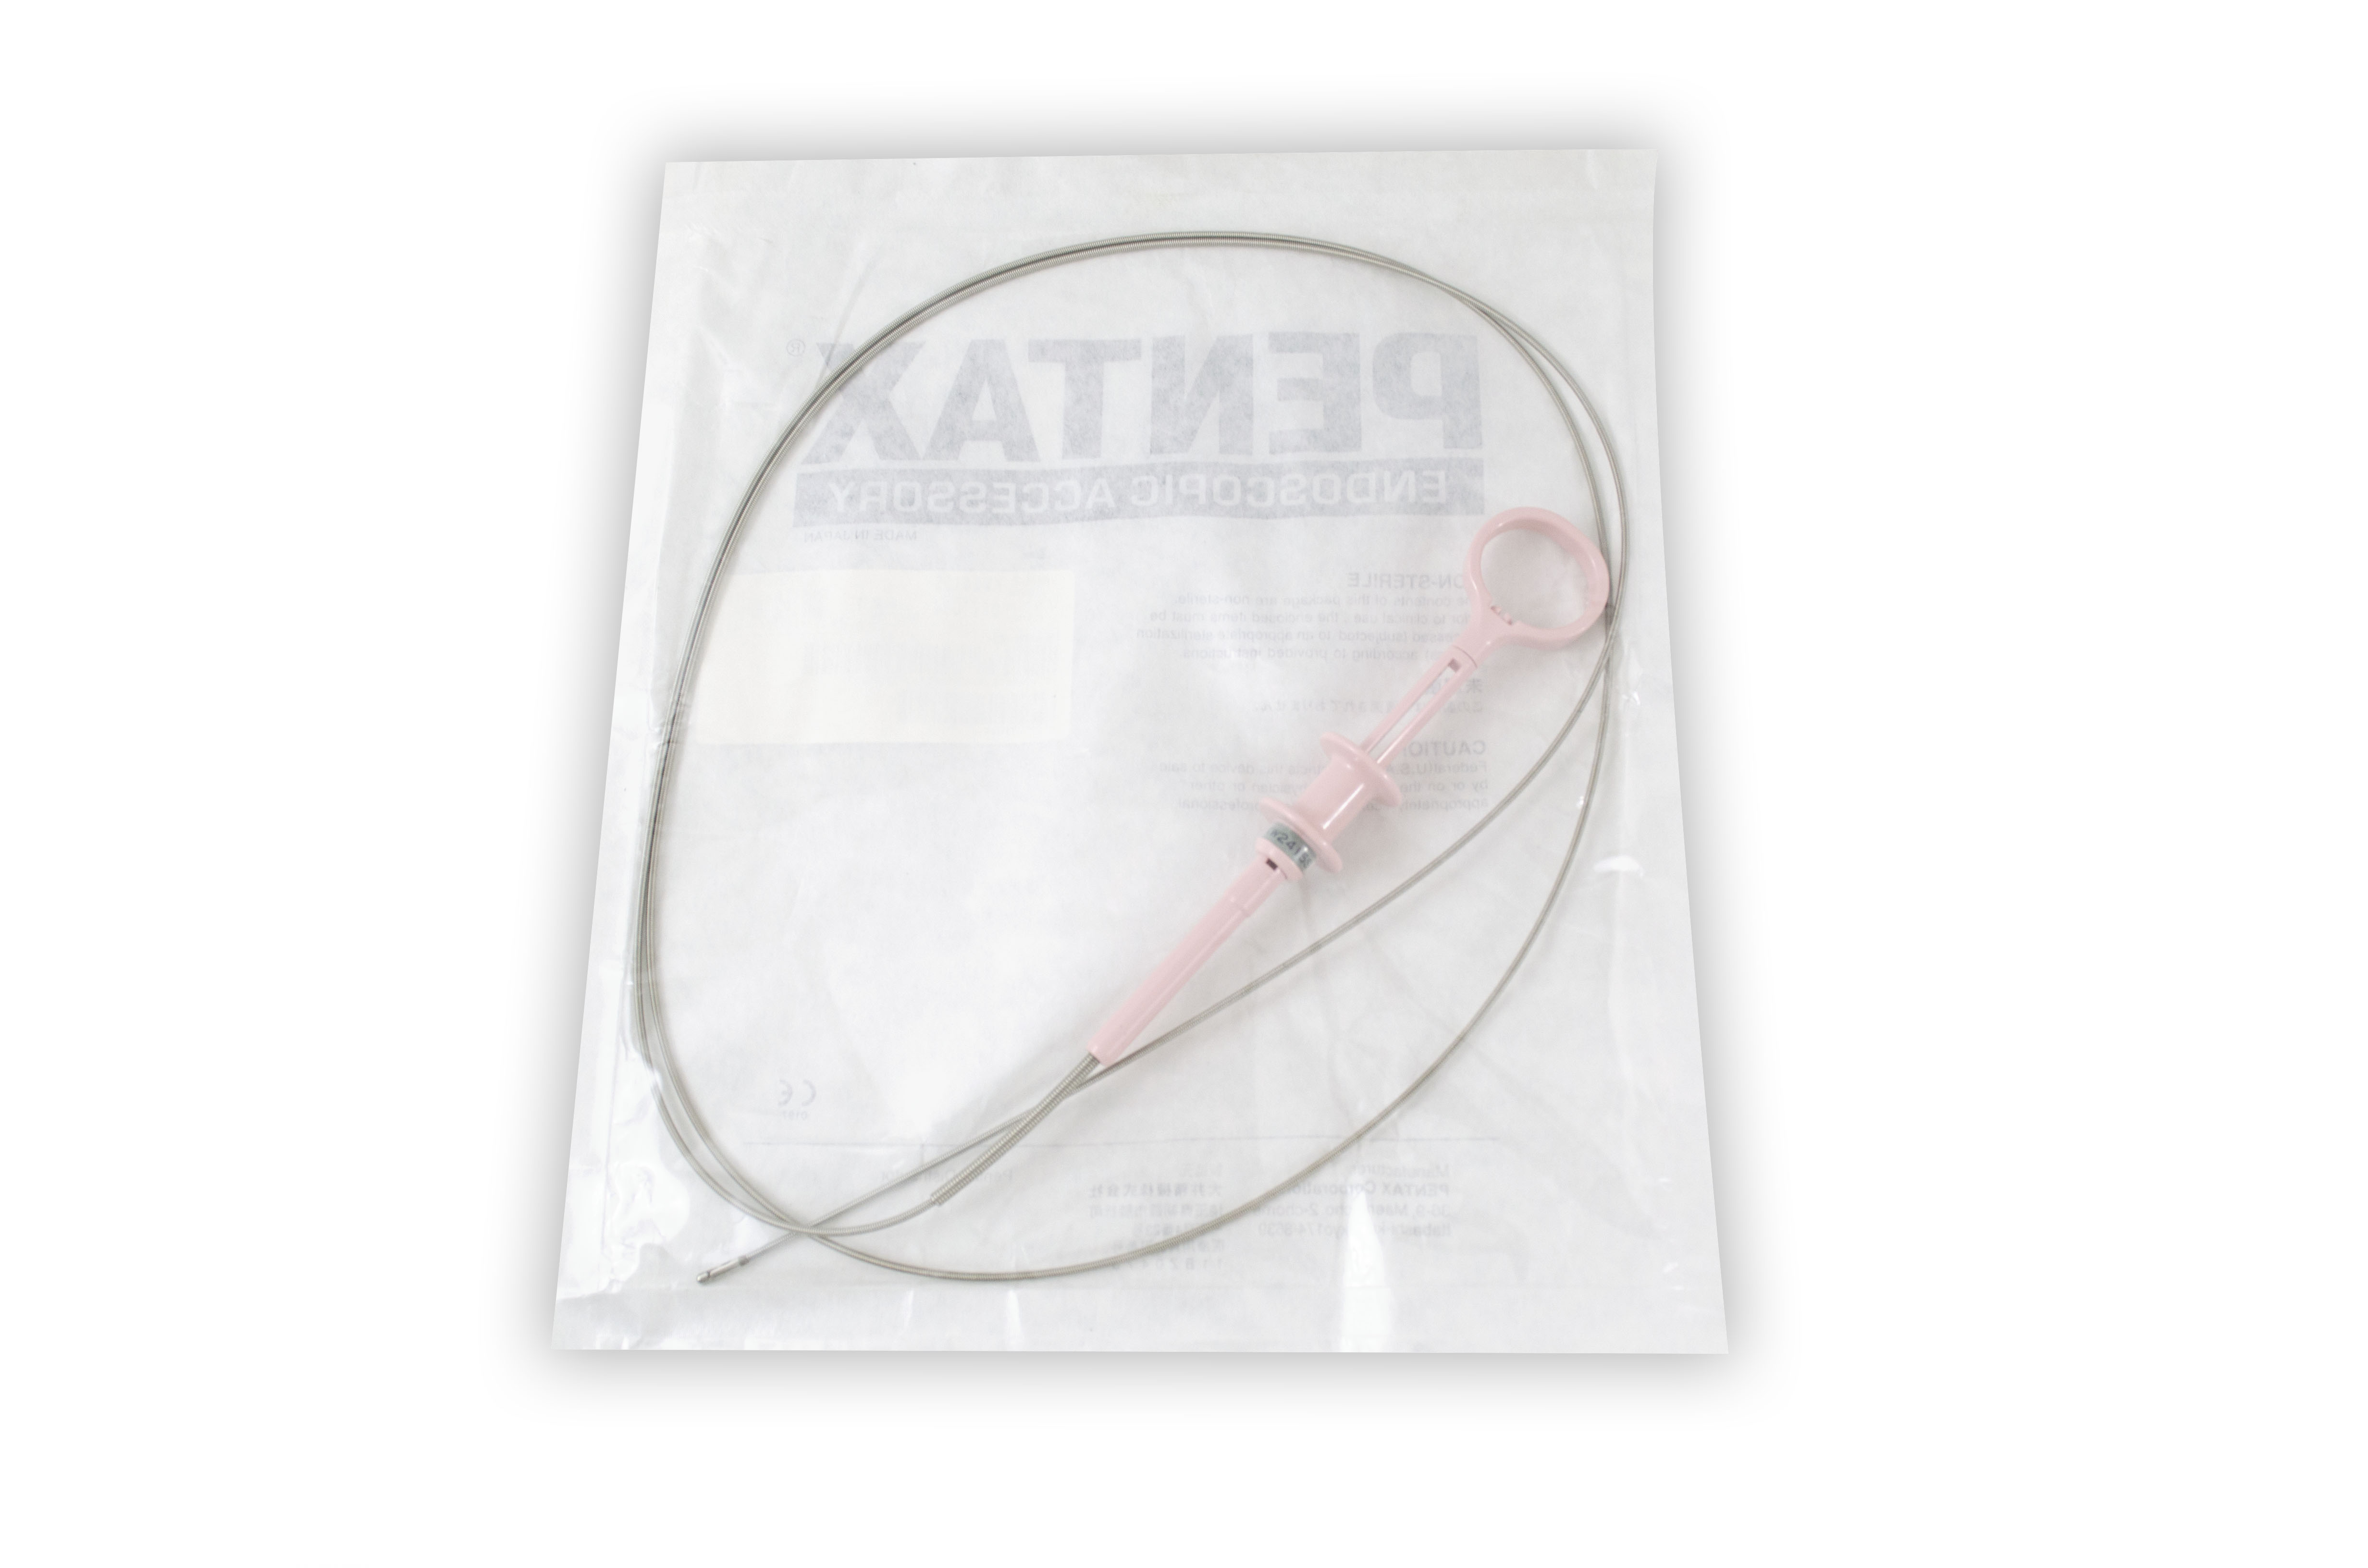 Pentax Reusable Autoclavable Biopsy Forceps with Window - KW2415S (Original Packaging)